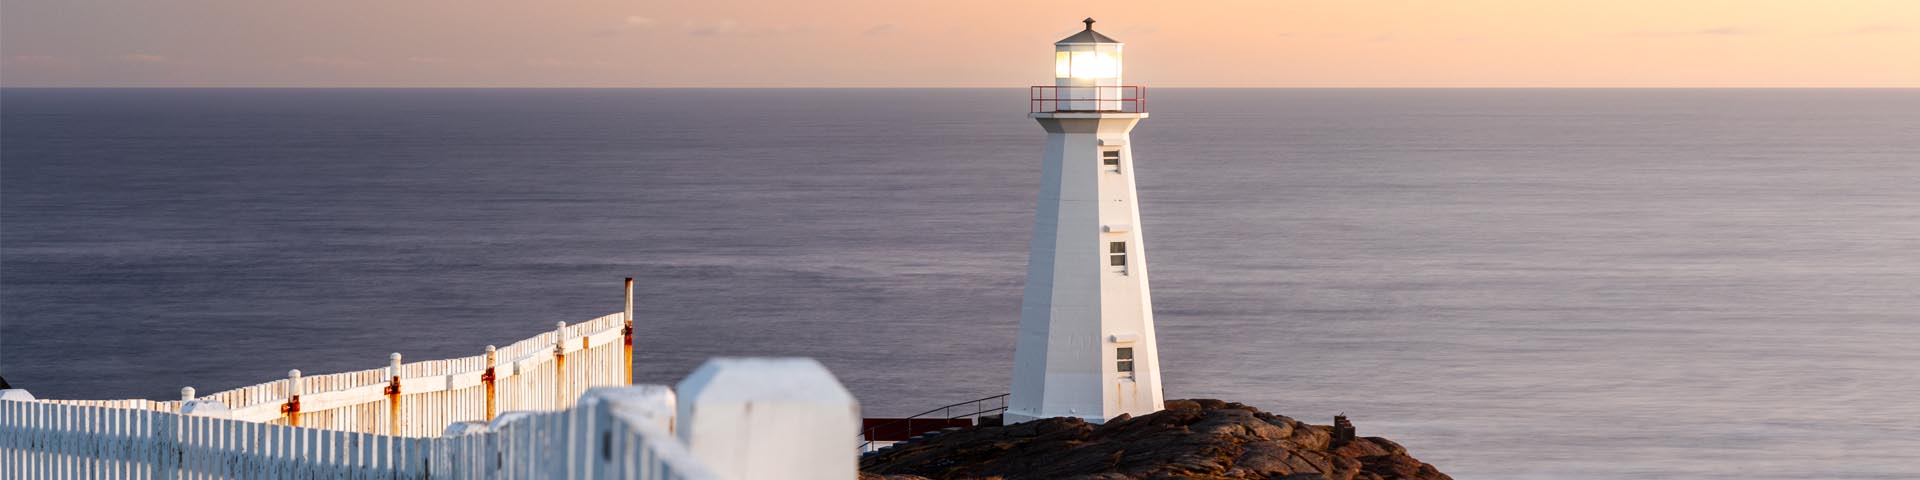 Sunrise over the Atlantic at Cape Spear Lighthouse National Historic Site.